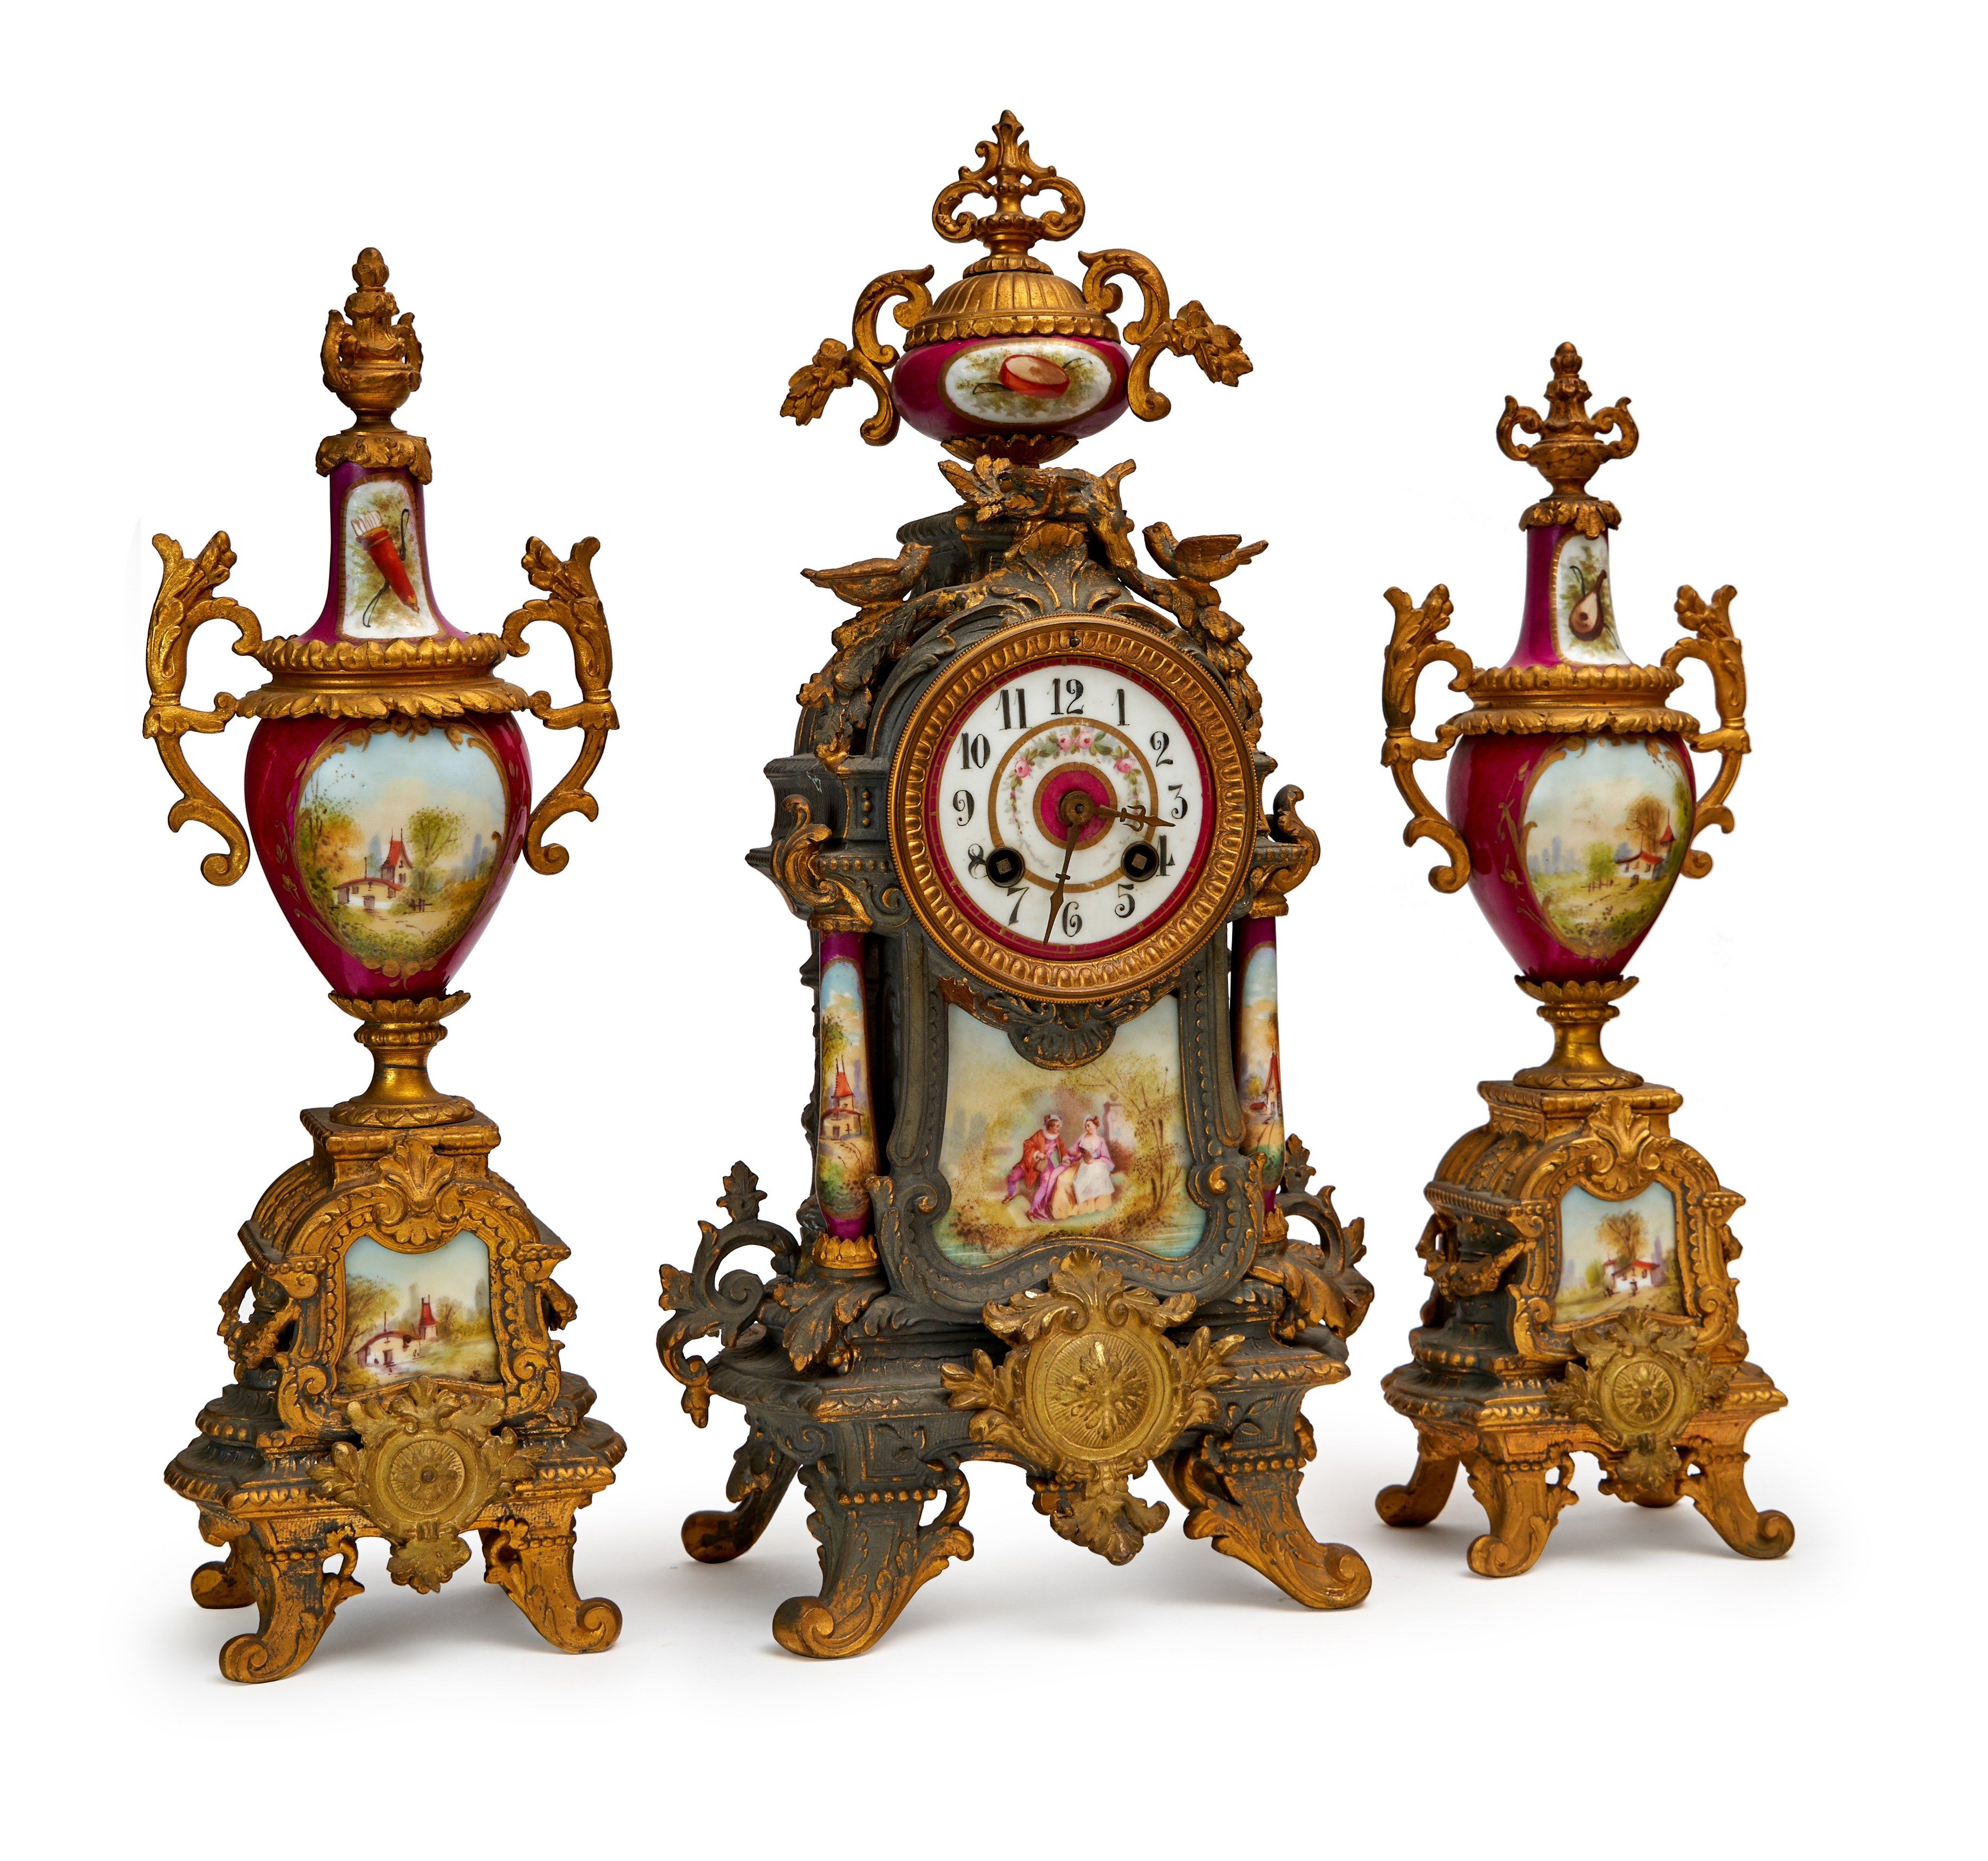 A PORCELAIN & BRONZE MOUNTED CLOCK GARNITURE, FRANCE, PROBABLY 19TH CENTURY